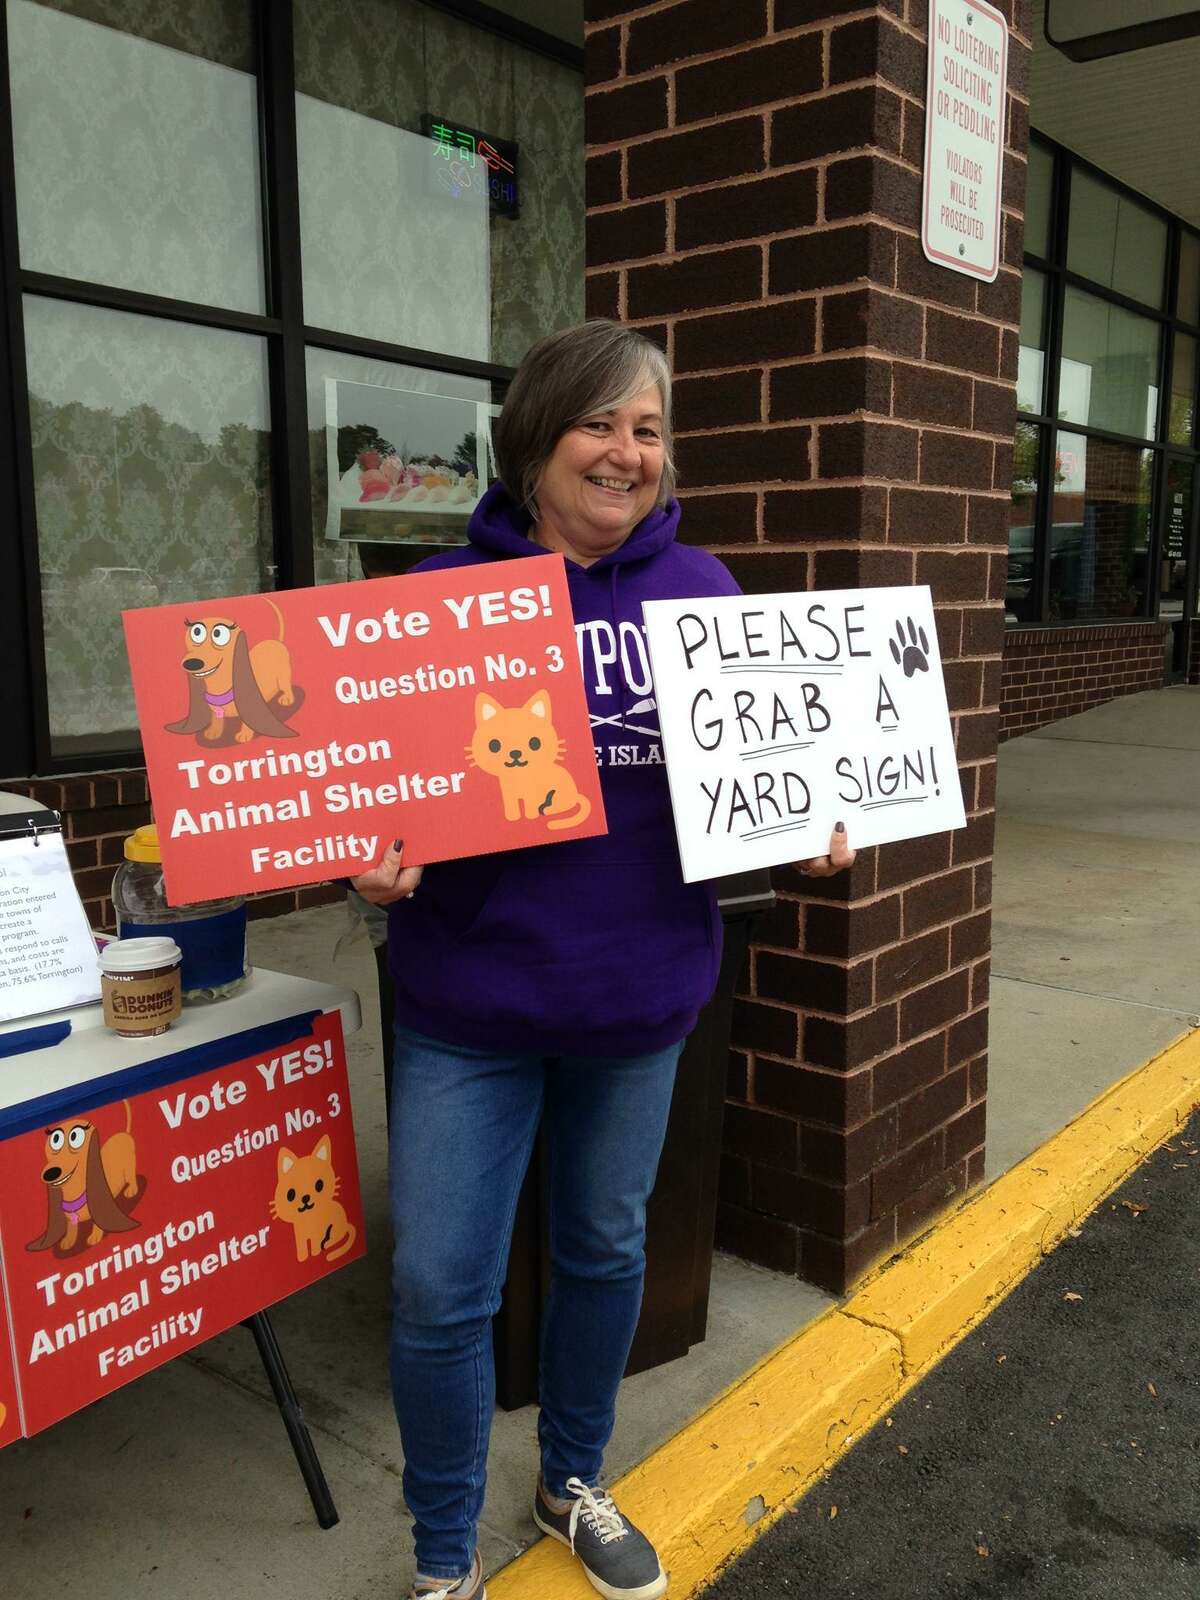 Patti Sebest, a member of the Friends of the Torrington Animal Shelter Facility, is hoping voters will support the city’s efforts to have a regional animal shelter built in the city to replace its aging dog pound. The group is holding an awareness event in front of Serenity Nail Spa in Torrington on Saturday, Nov. 3.